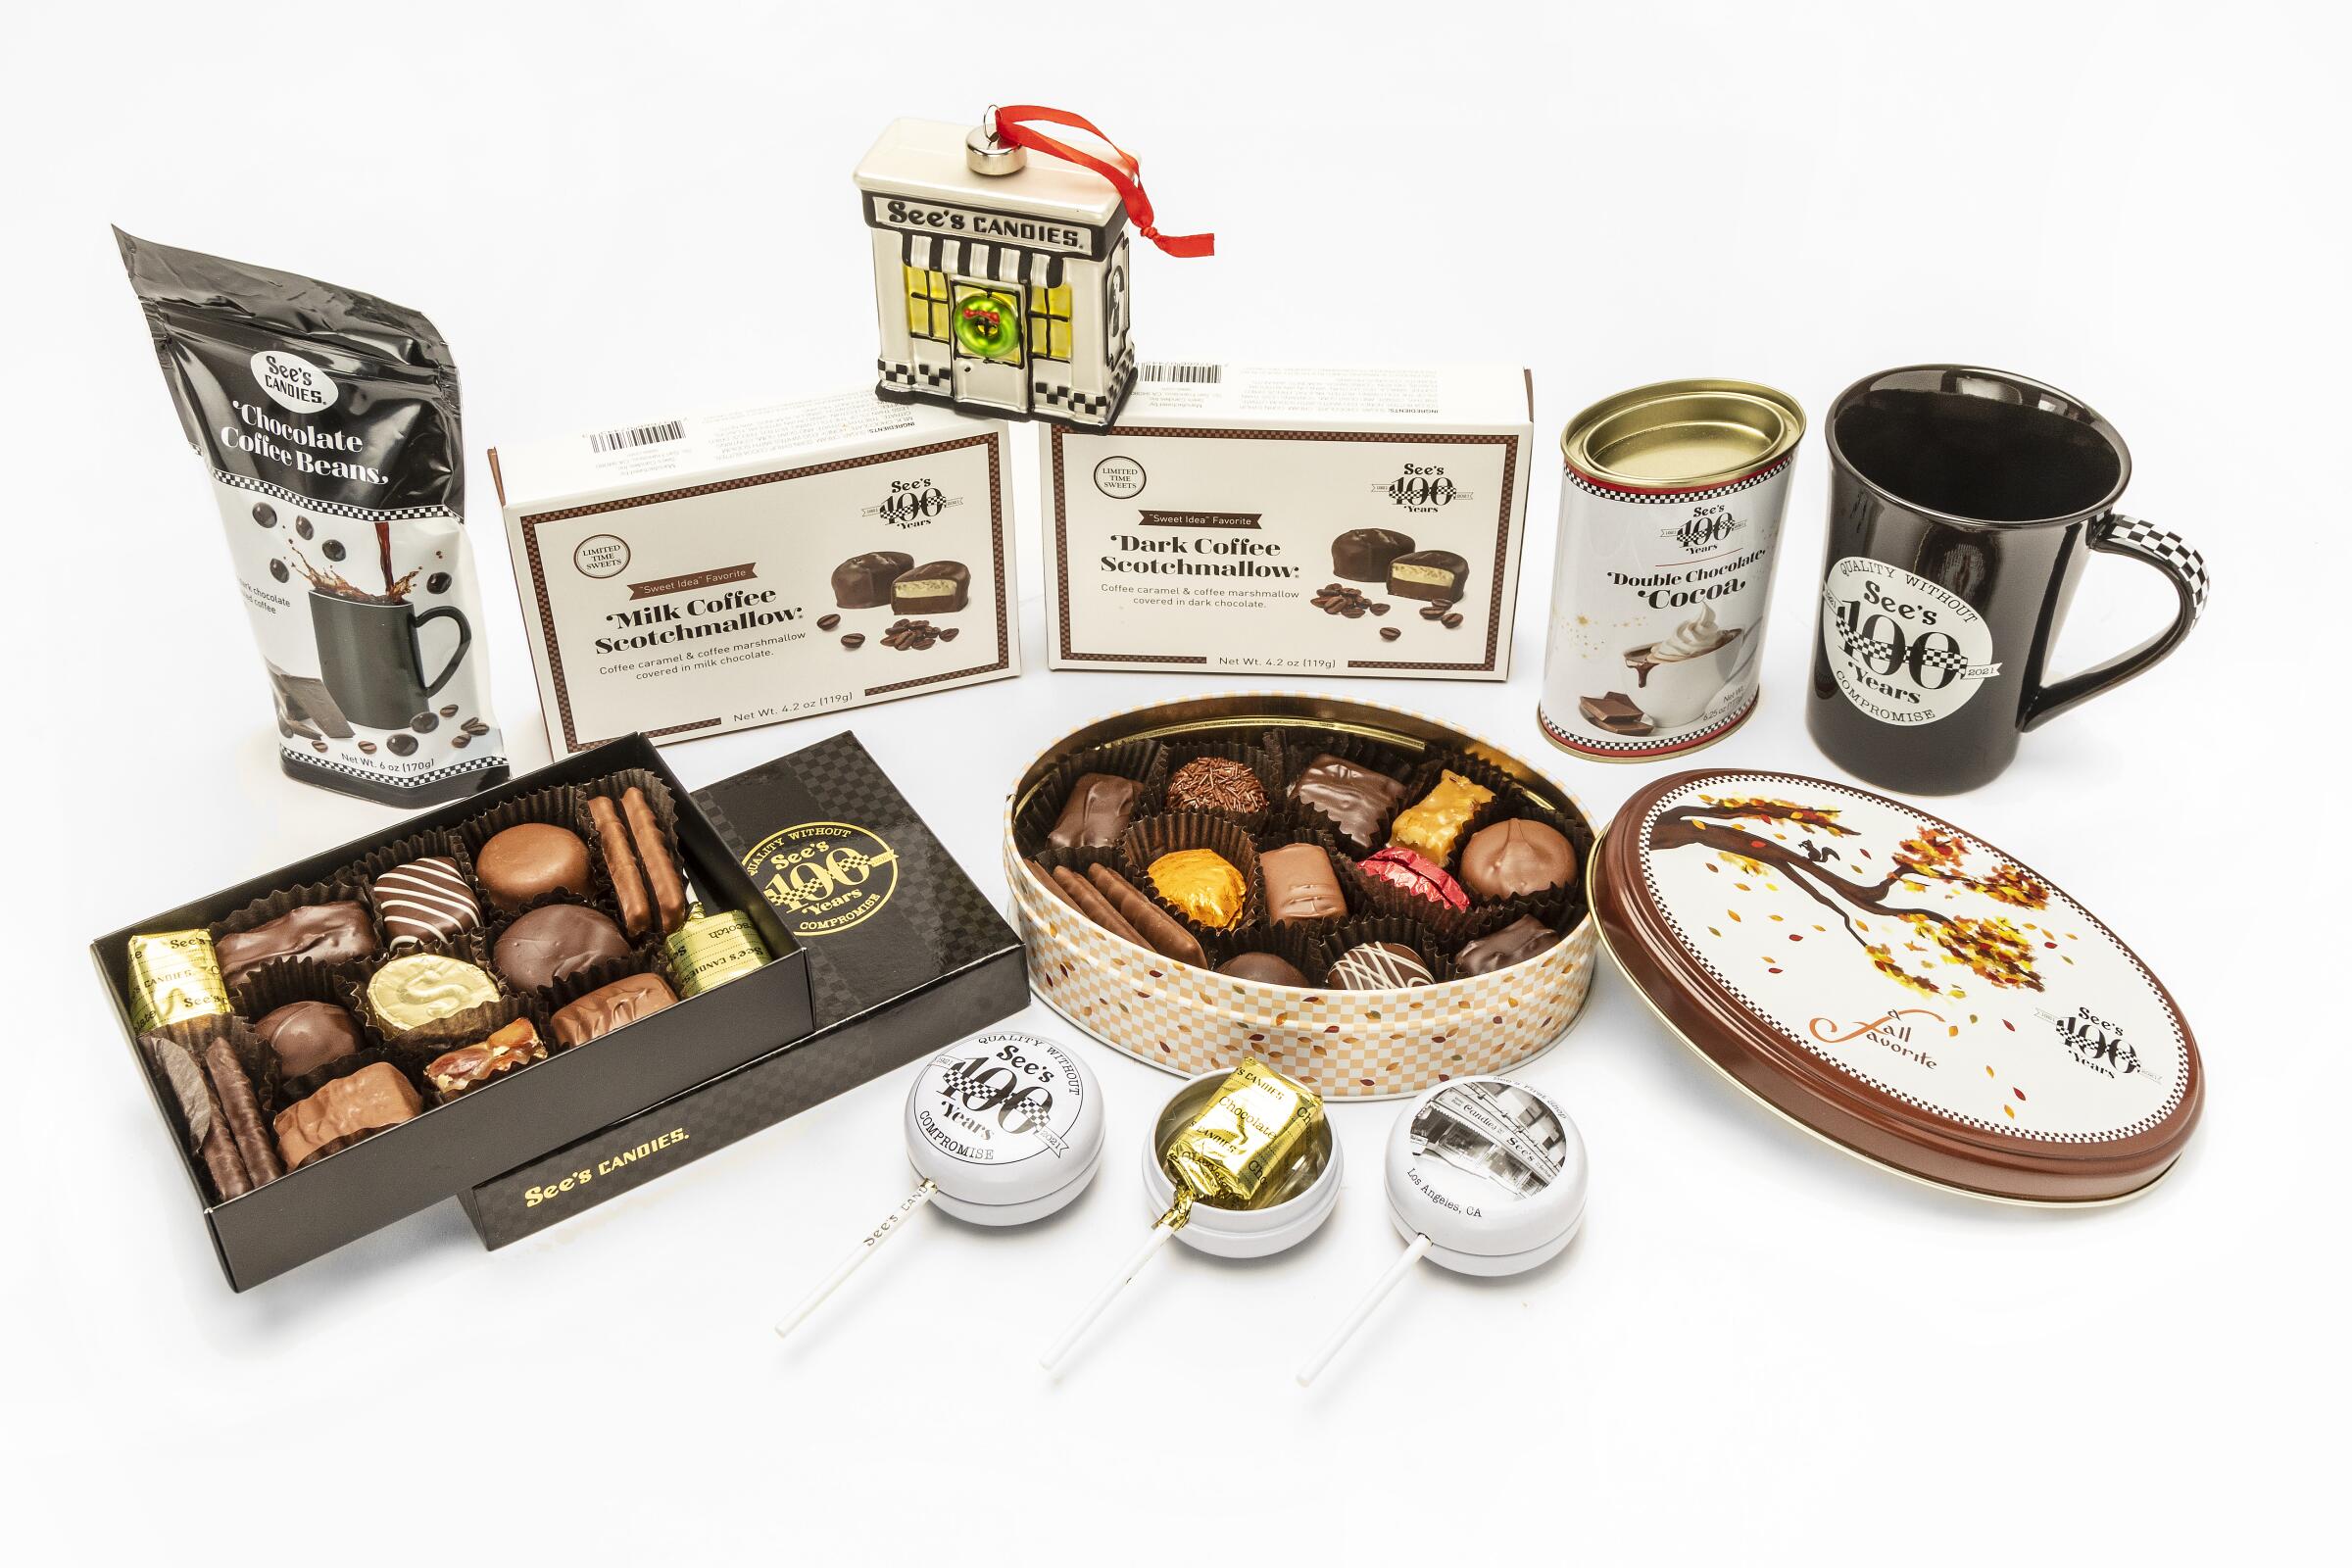 Containers of chocolates and other products commemorate See's Candies' 100 years